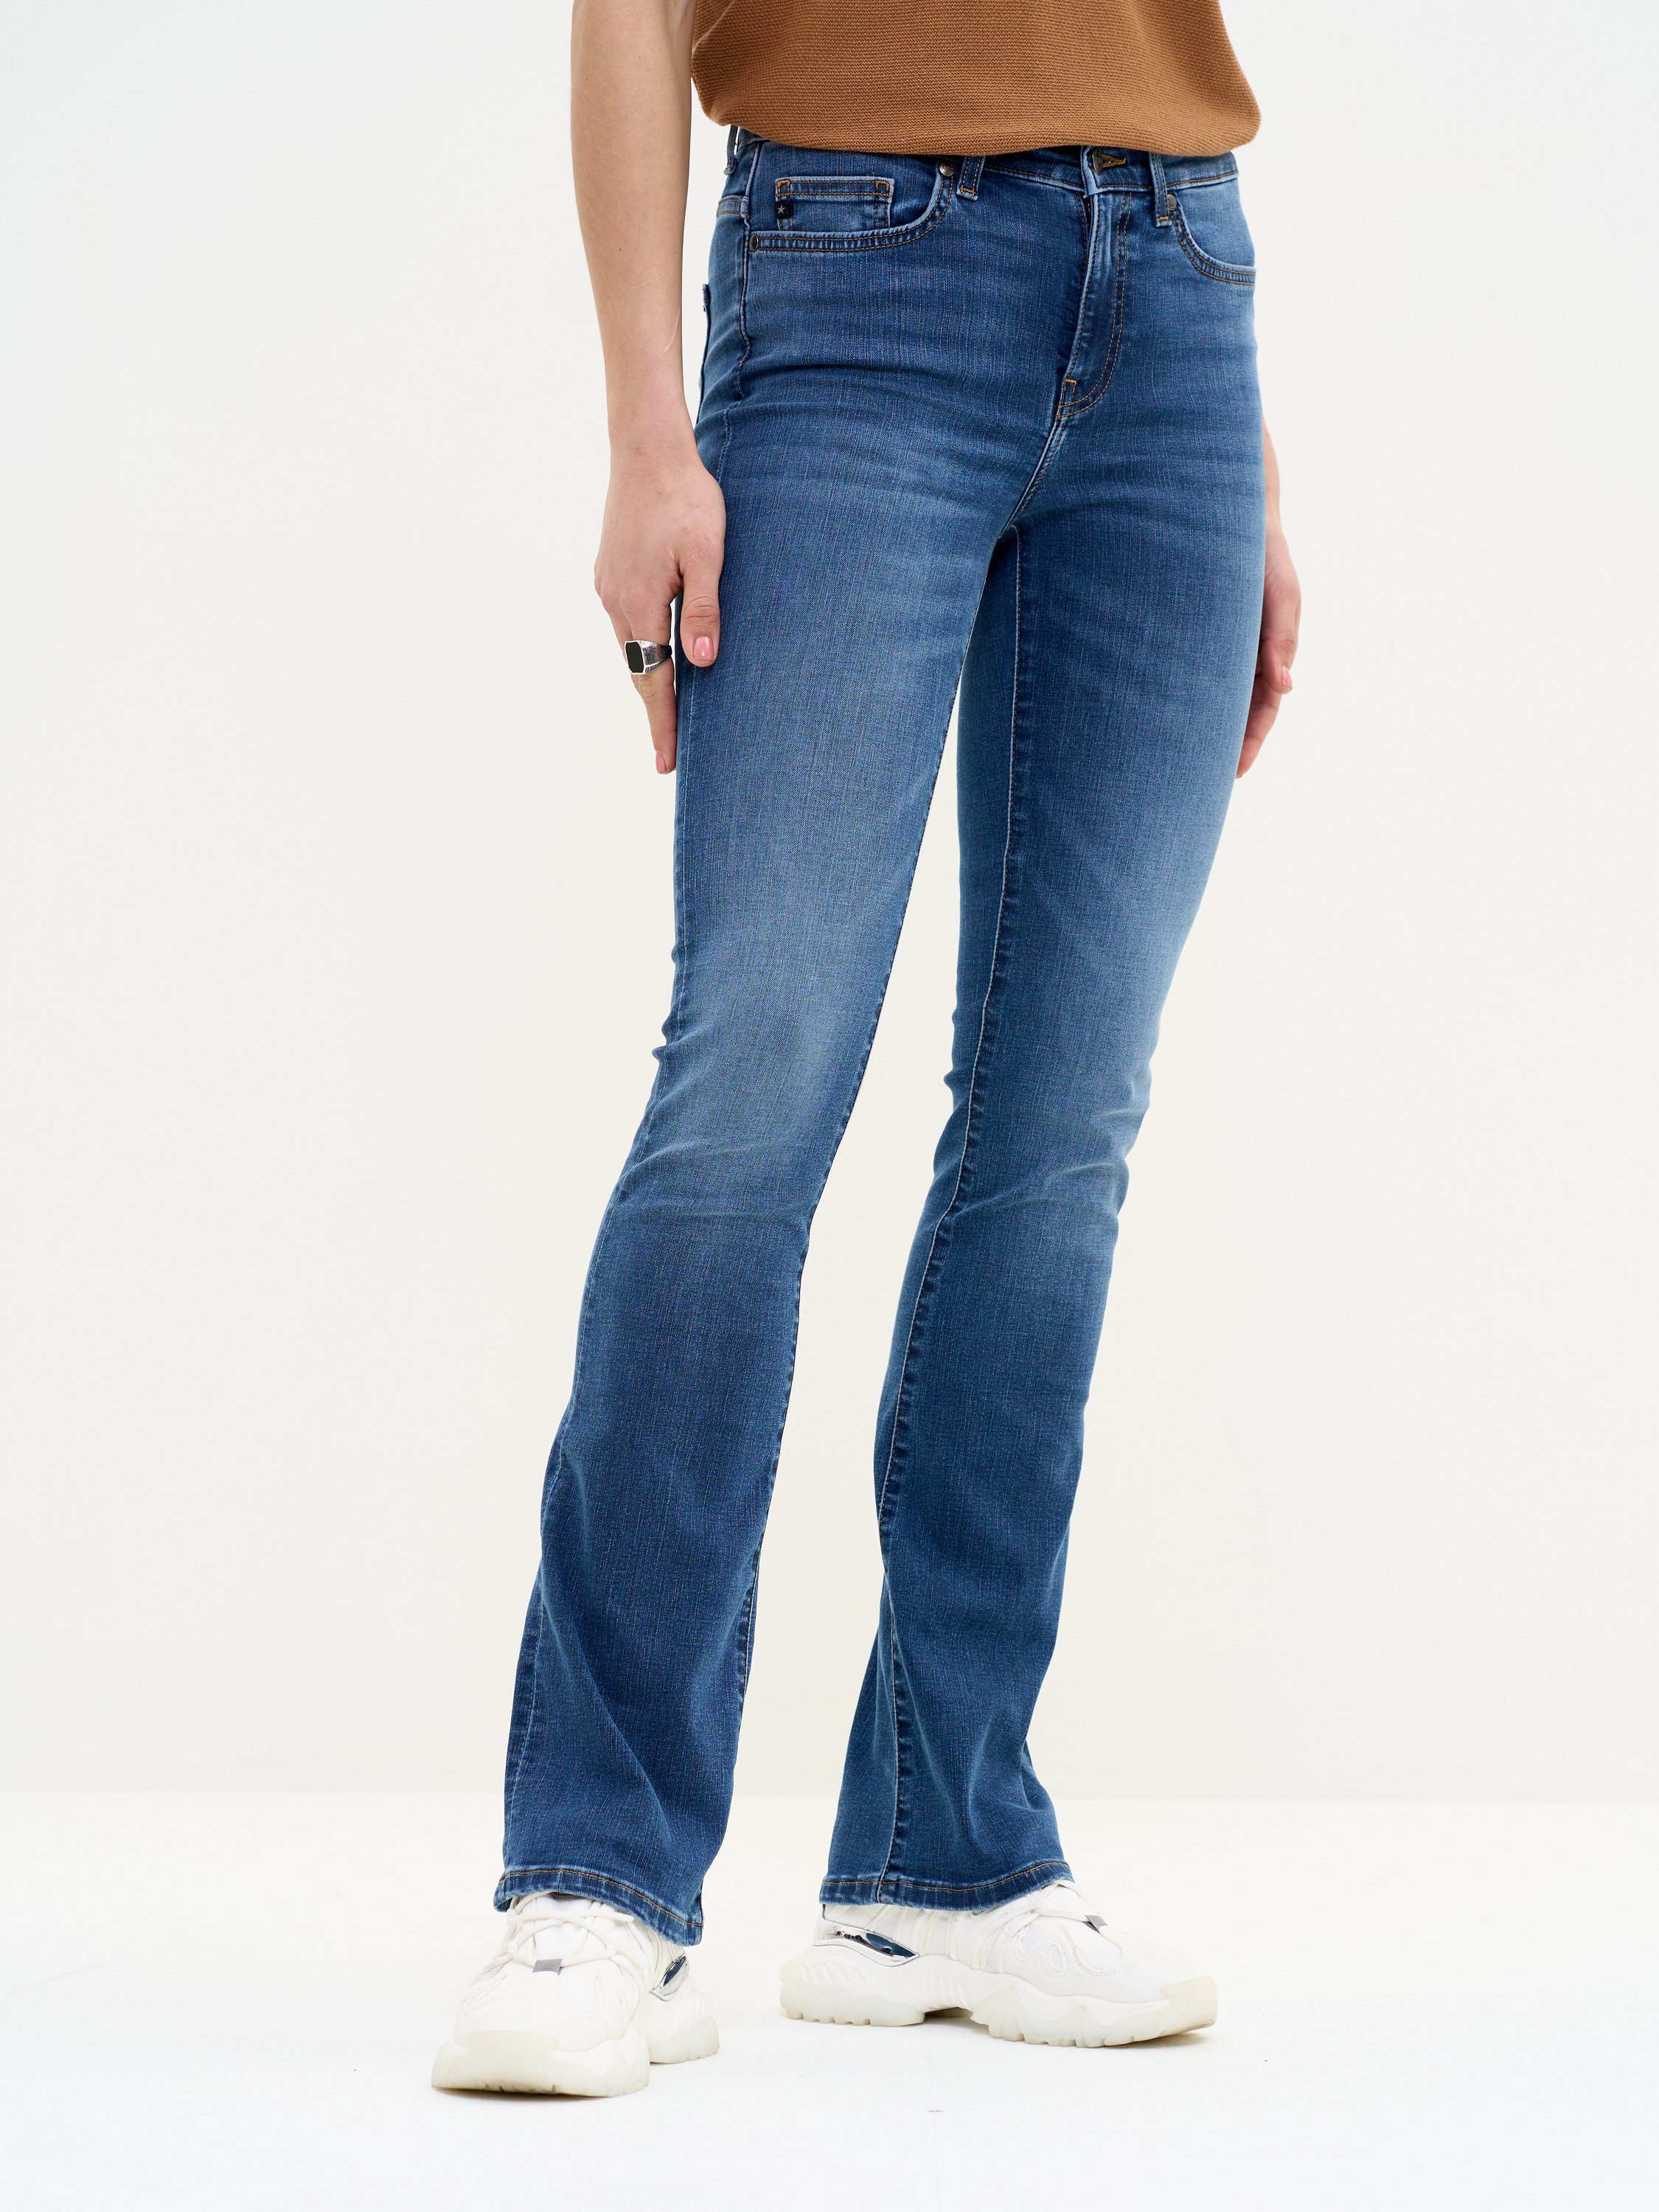 BIG STAR Bootcut-Jeans ARIANA BOOTCUT normale Leibhöhe